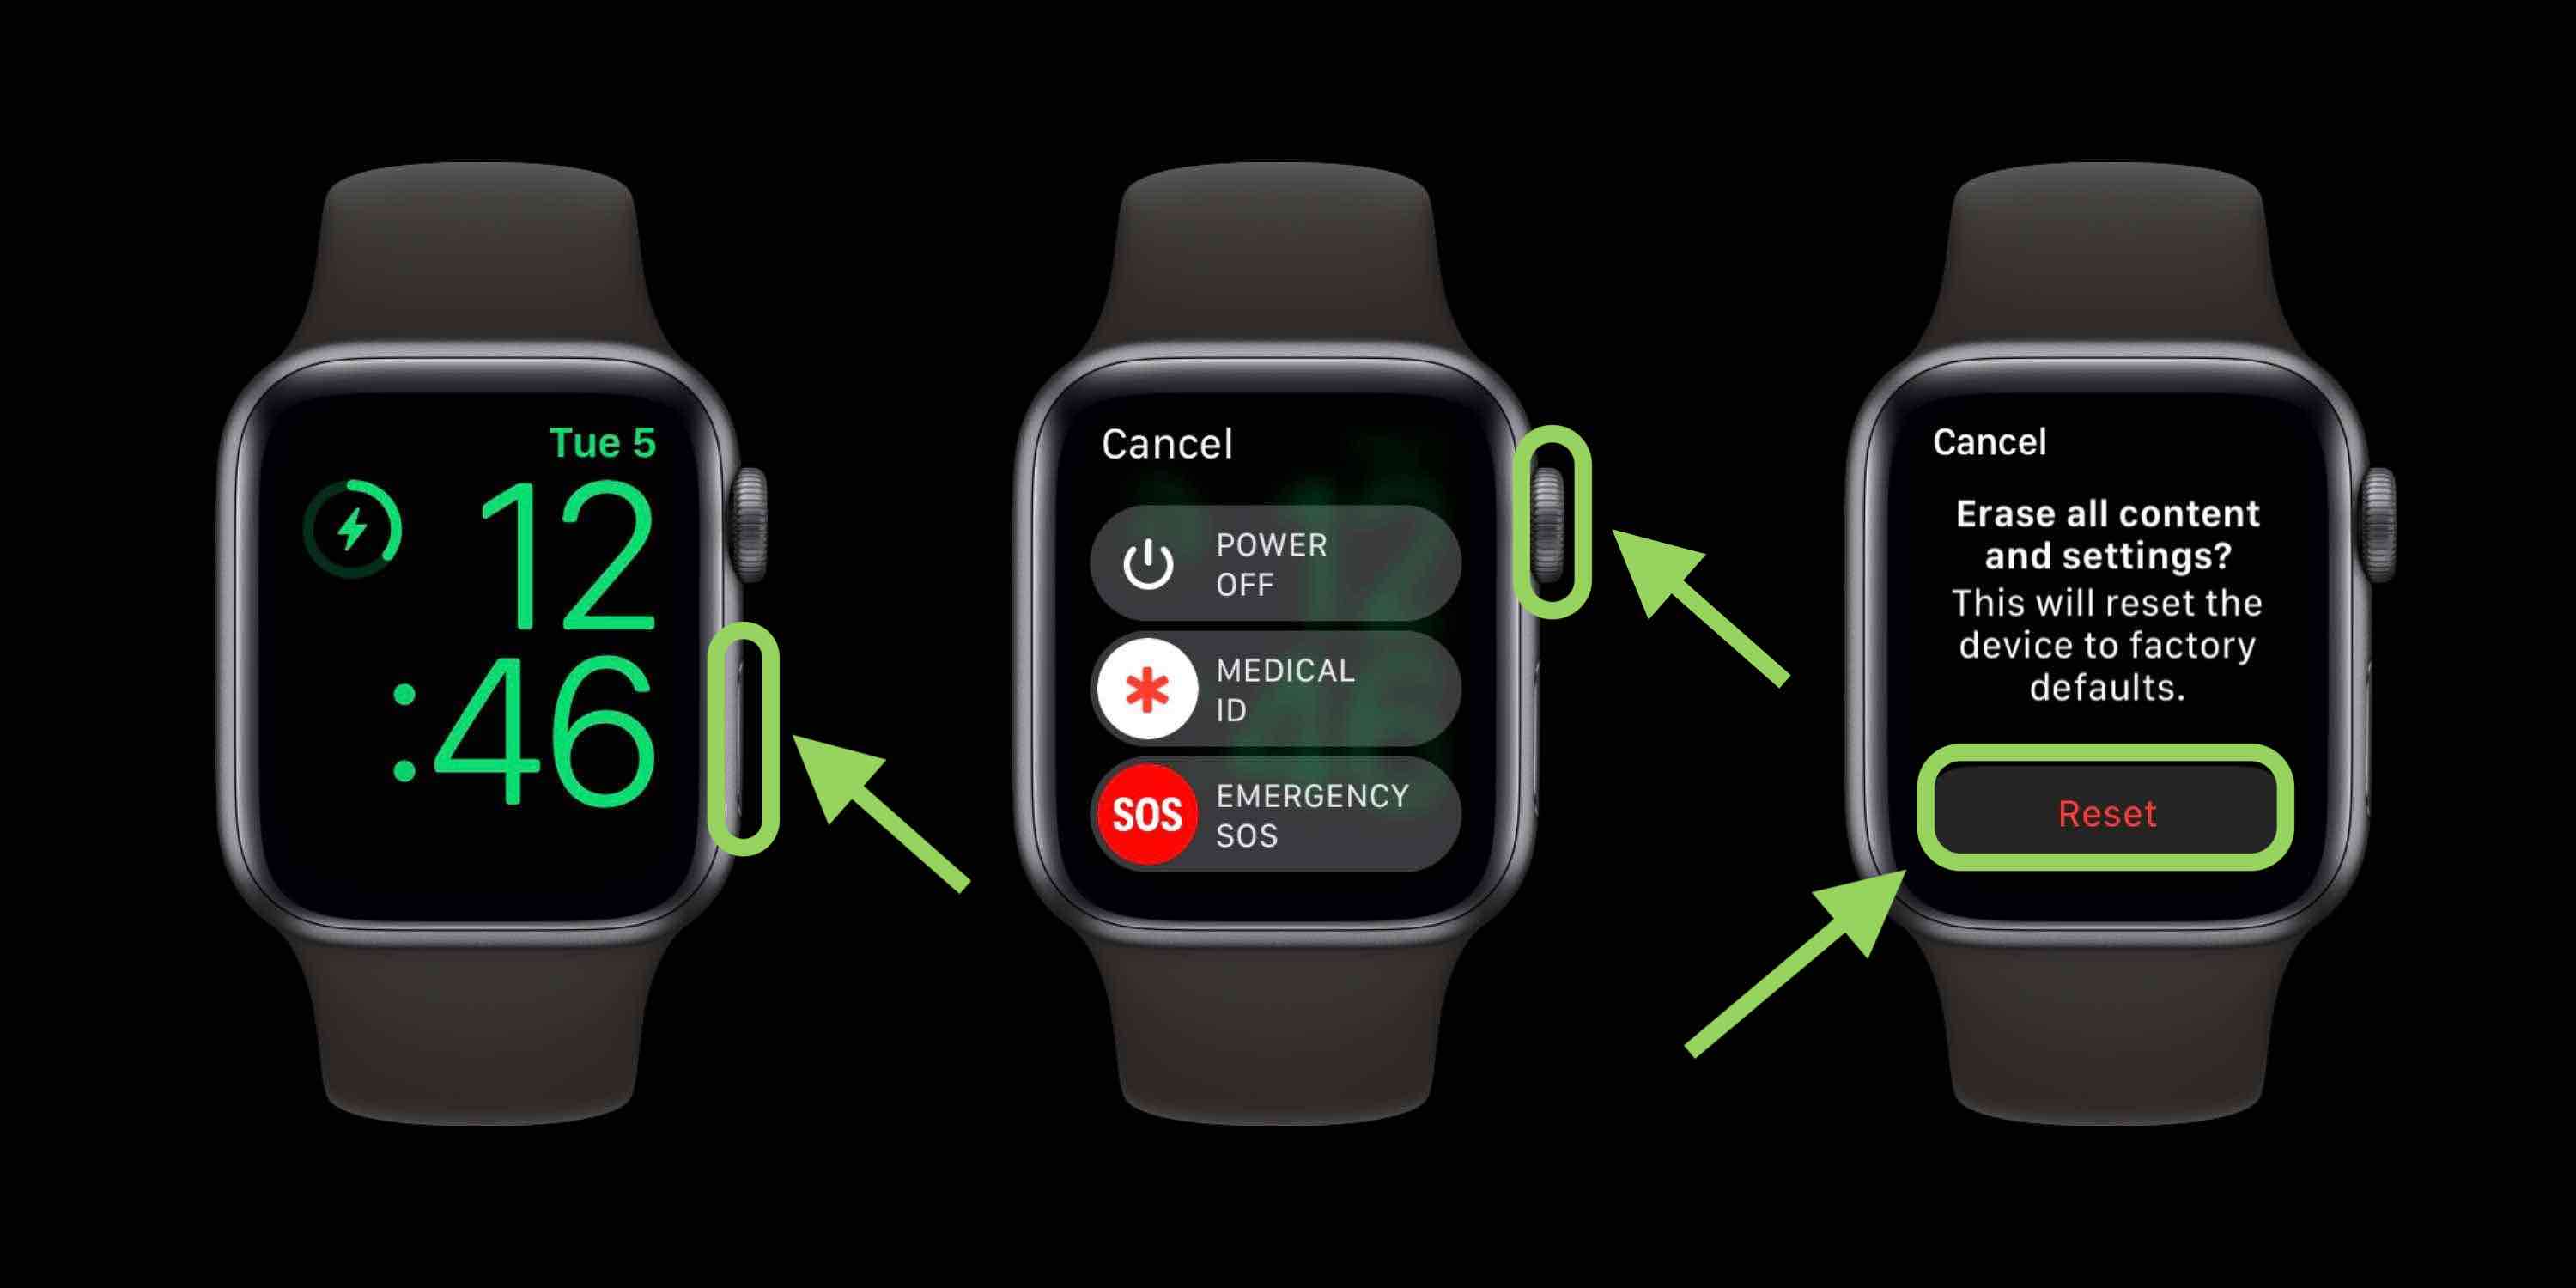 How to unpair Apple Watch without passcode